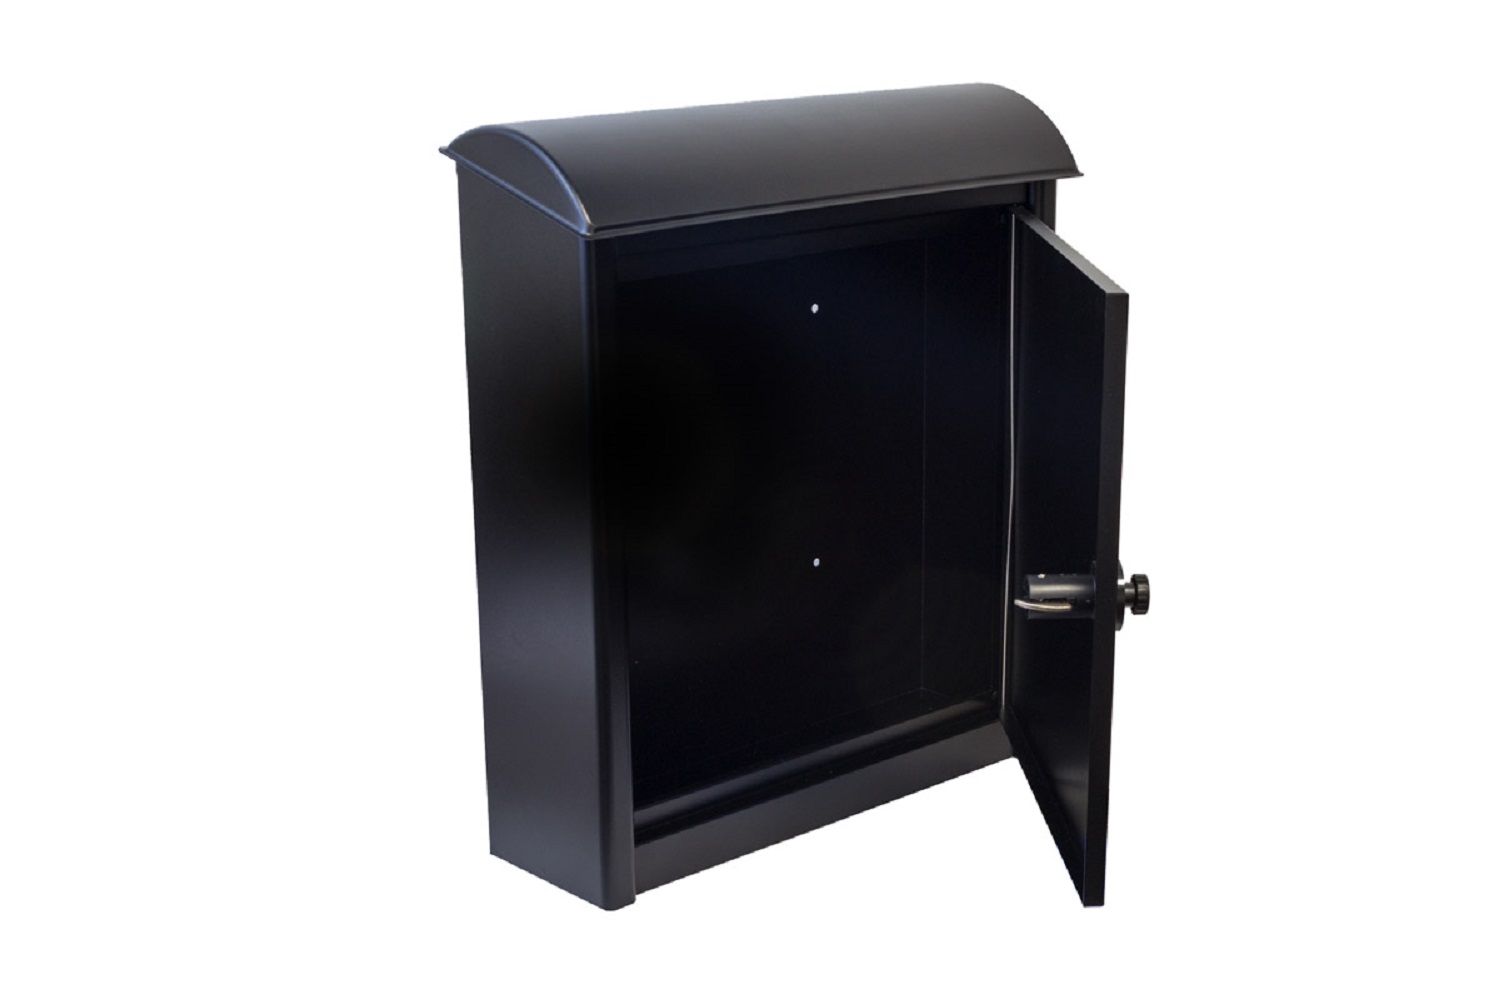 Qualarc Leece Wall Mounted Mailbox in Black with Combo Lock